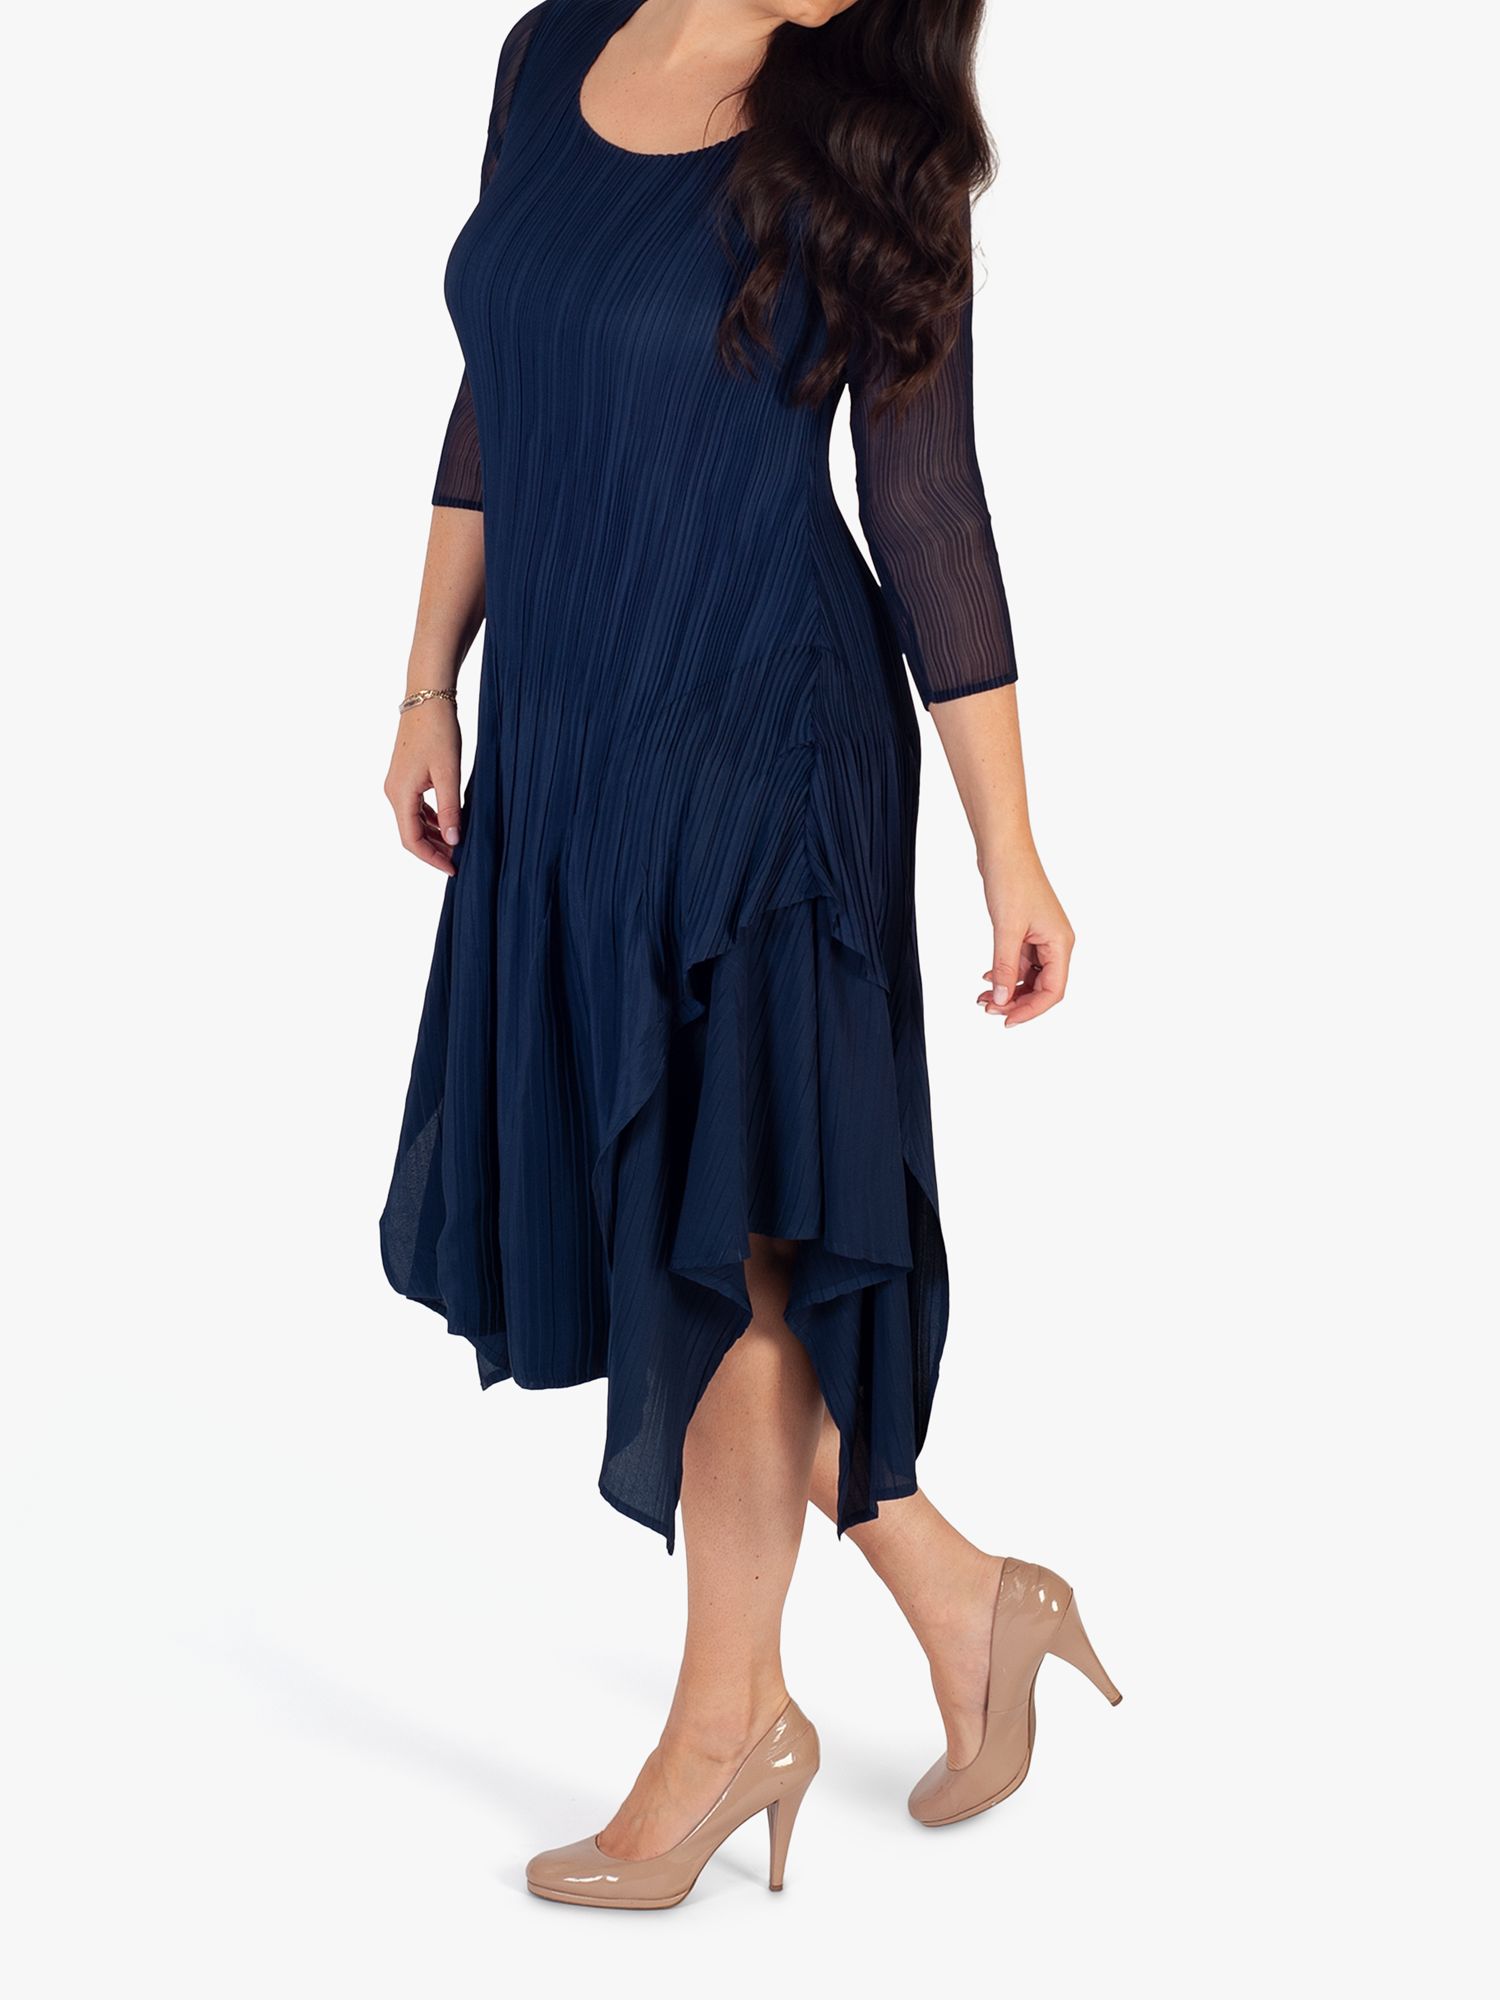 chesca Crush Pleat Layered Dress, Navy at John Lewis & Partners